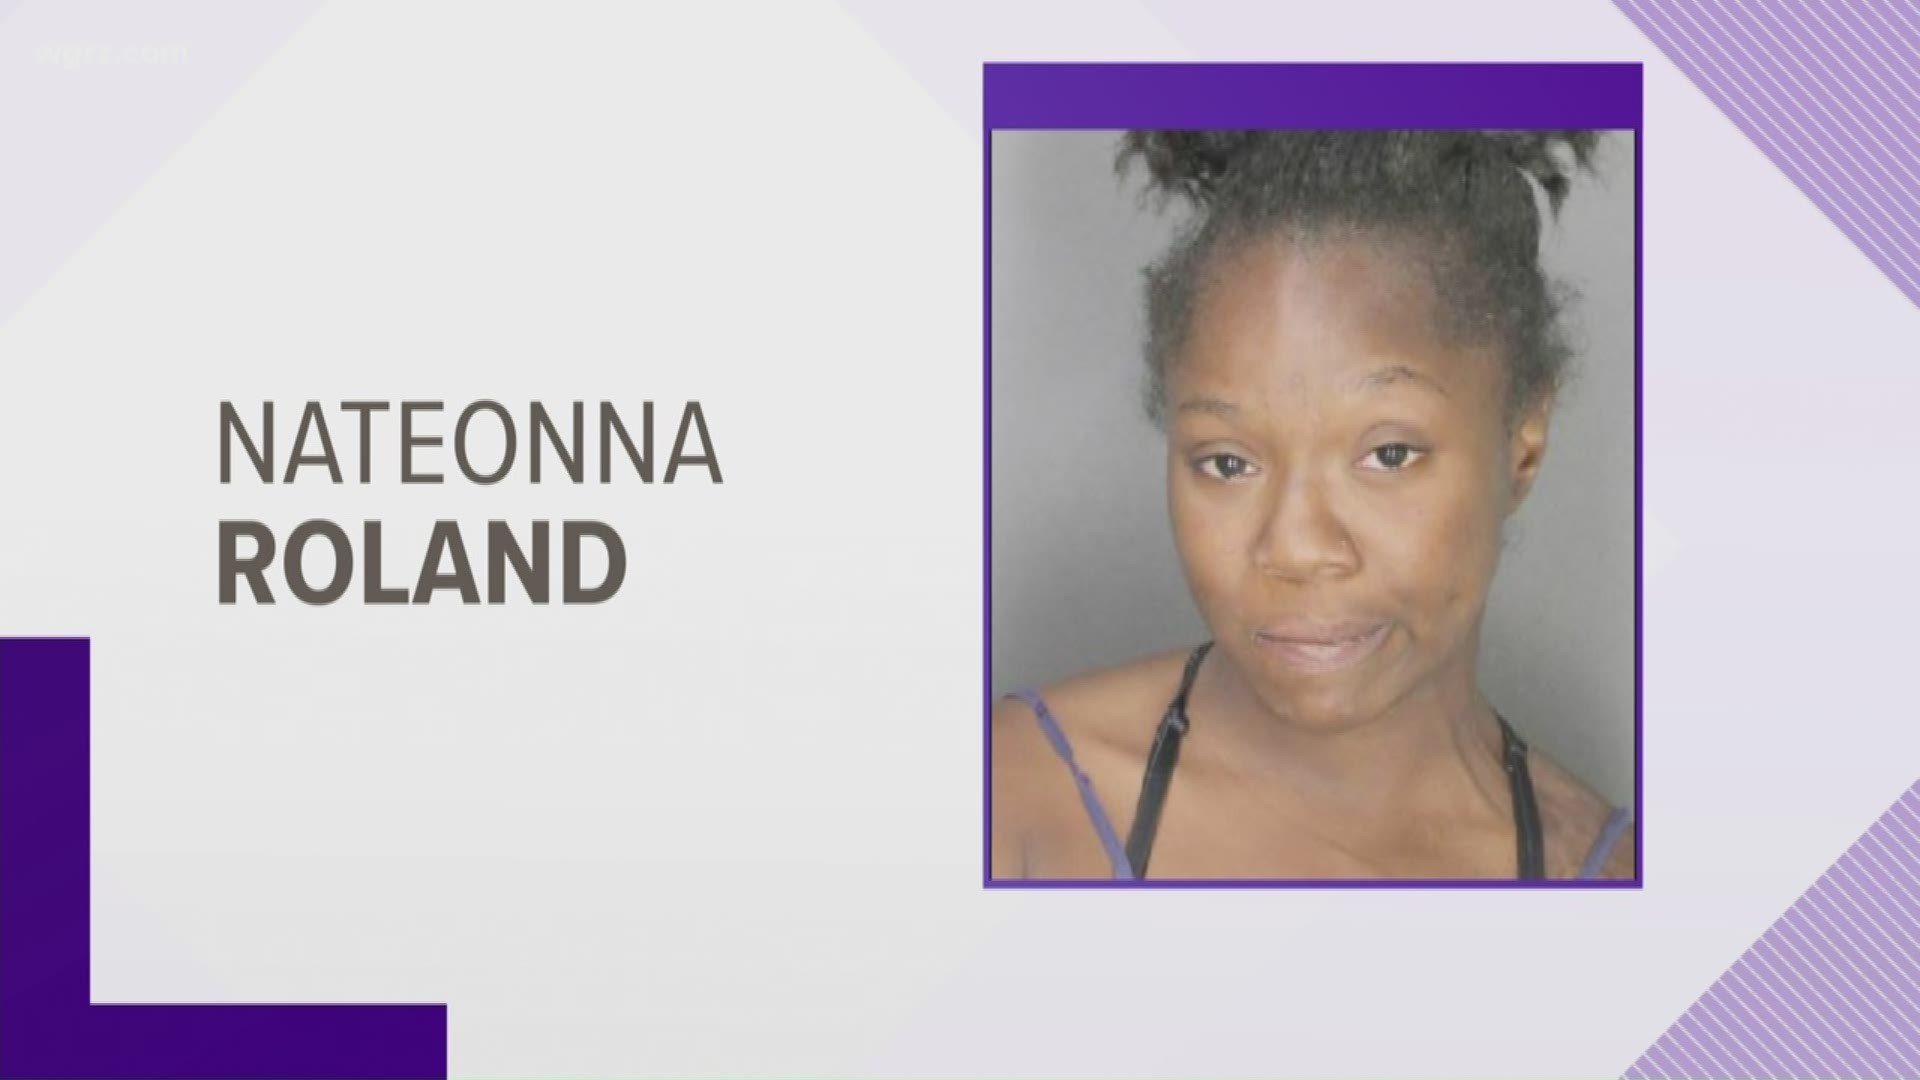 Nateonna J. Roland, 22, of Buffalo was arrested and faces a first-degree manslaughter charge.